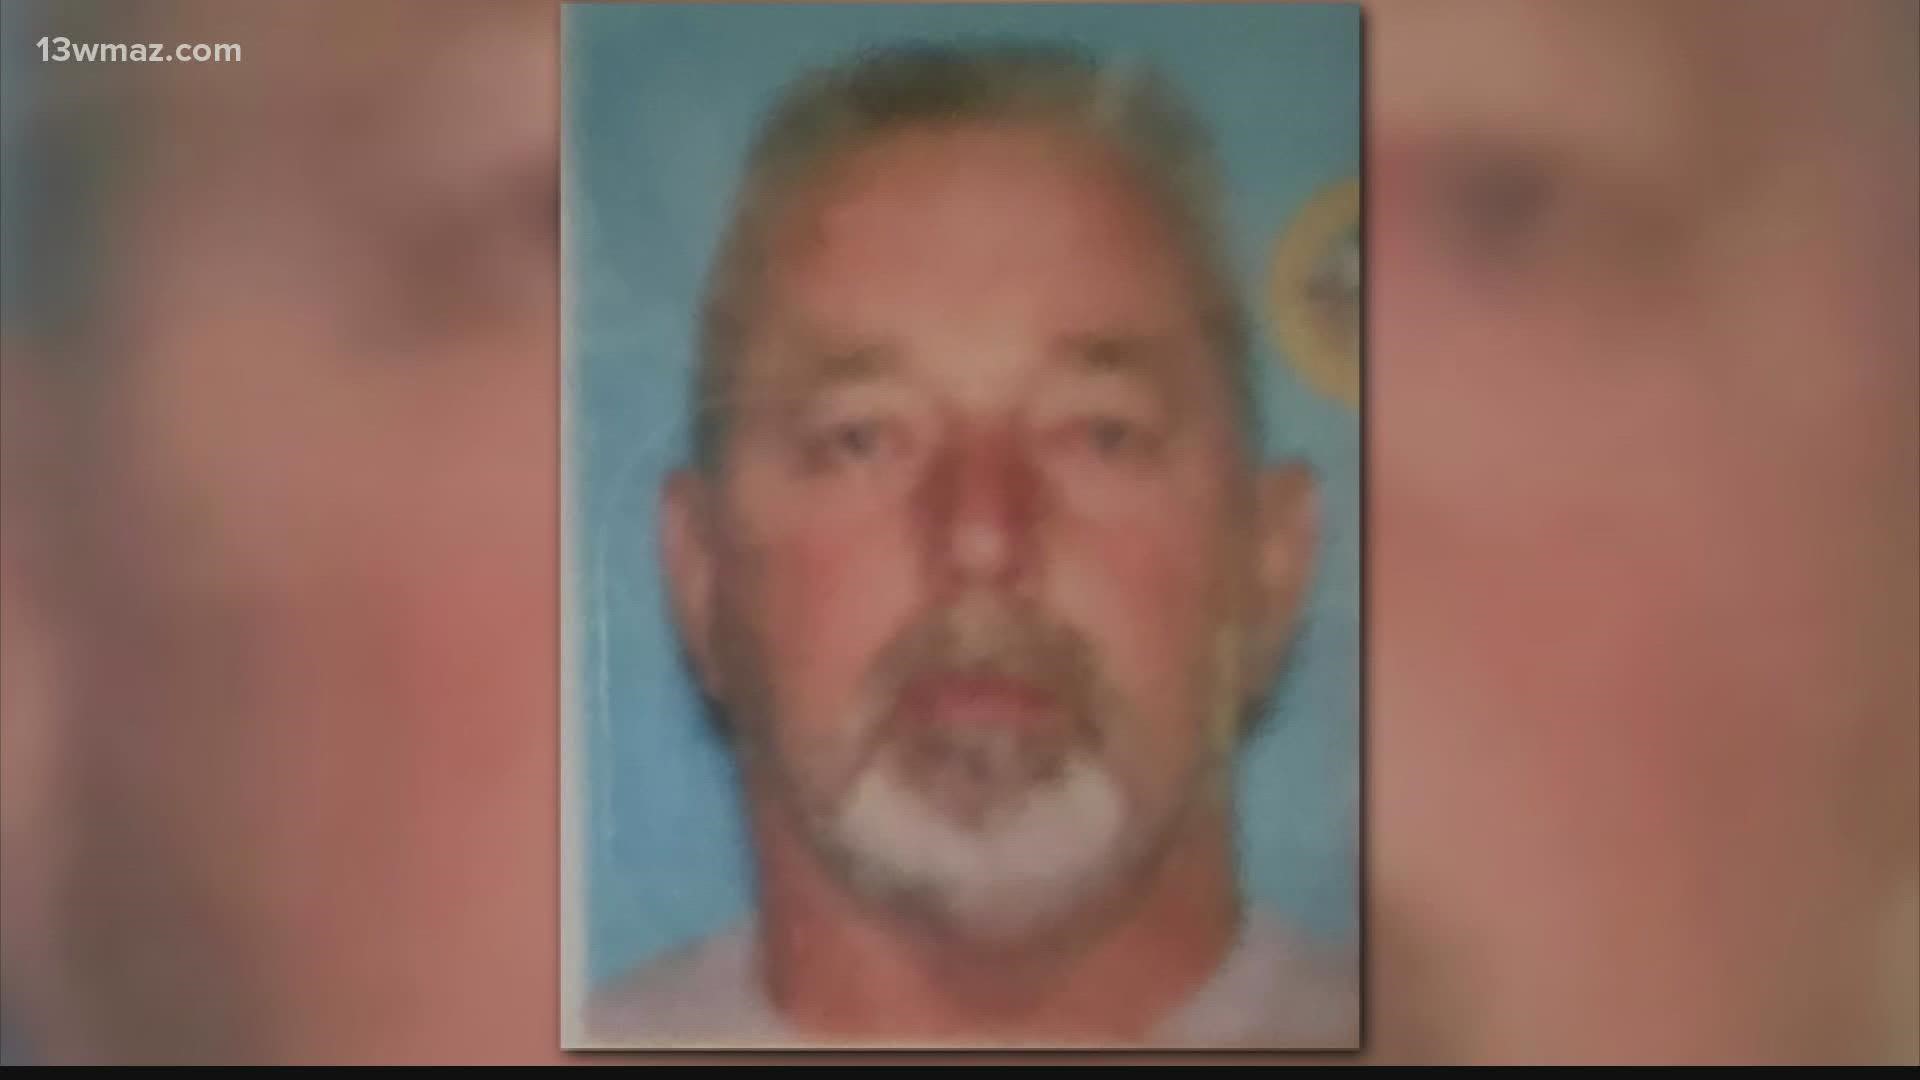 64-year-old Richard Thompson went missing around 2:30 p.m. driving a green side-by-side ATV heading east on Cyler Road